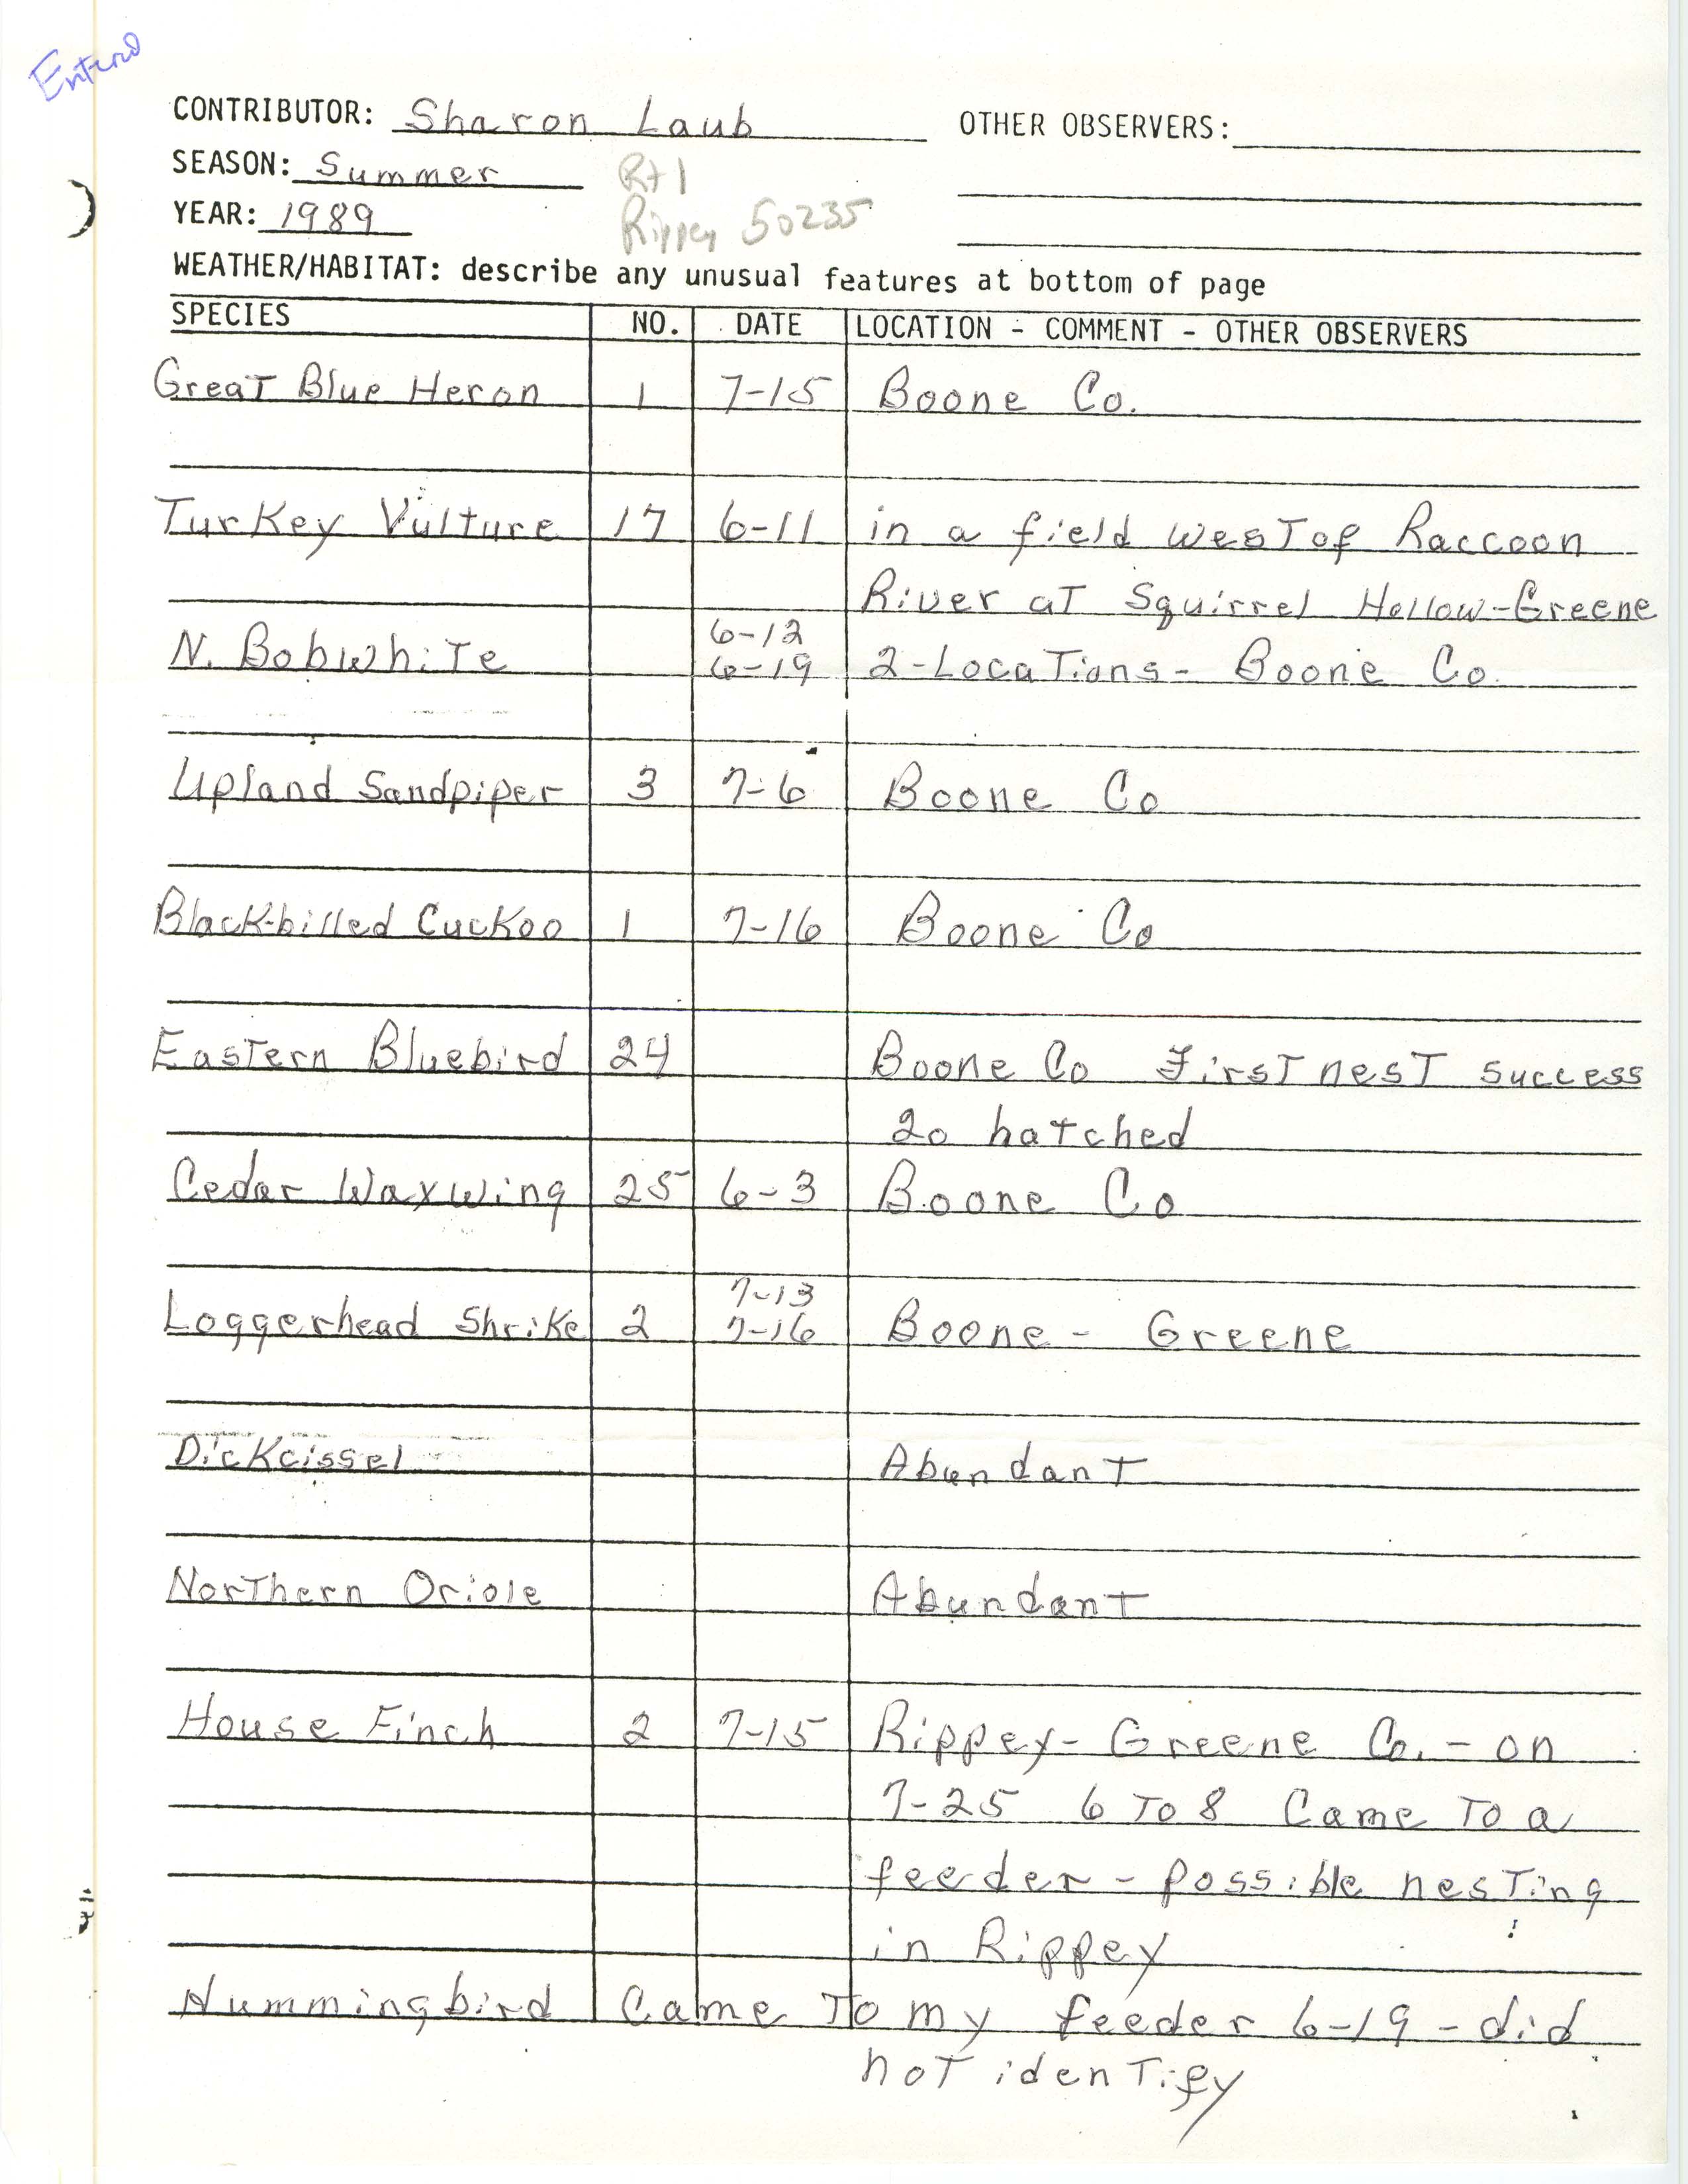 Field notes contributed by Sharon Laub, summer 1989